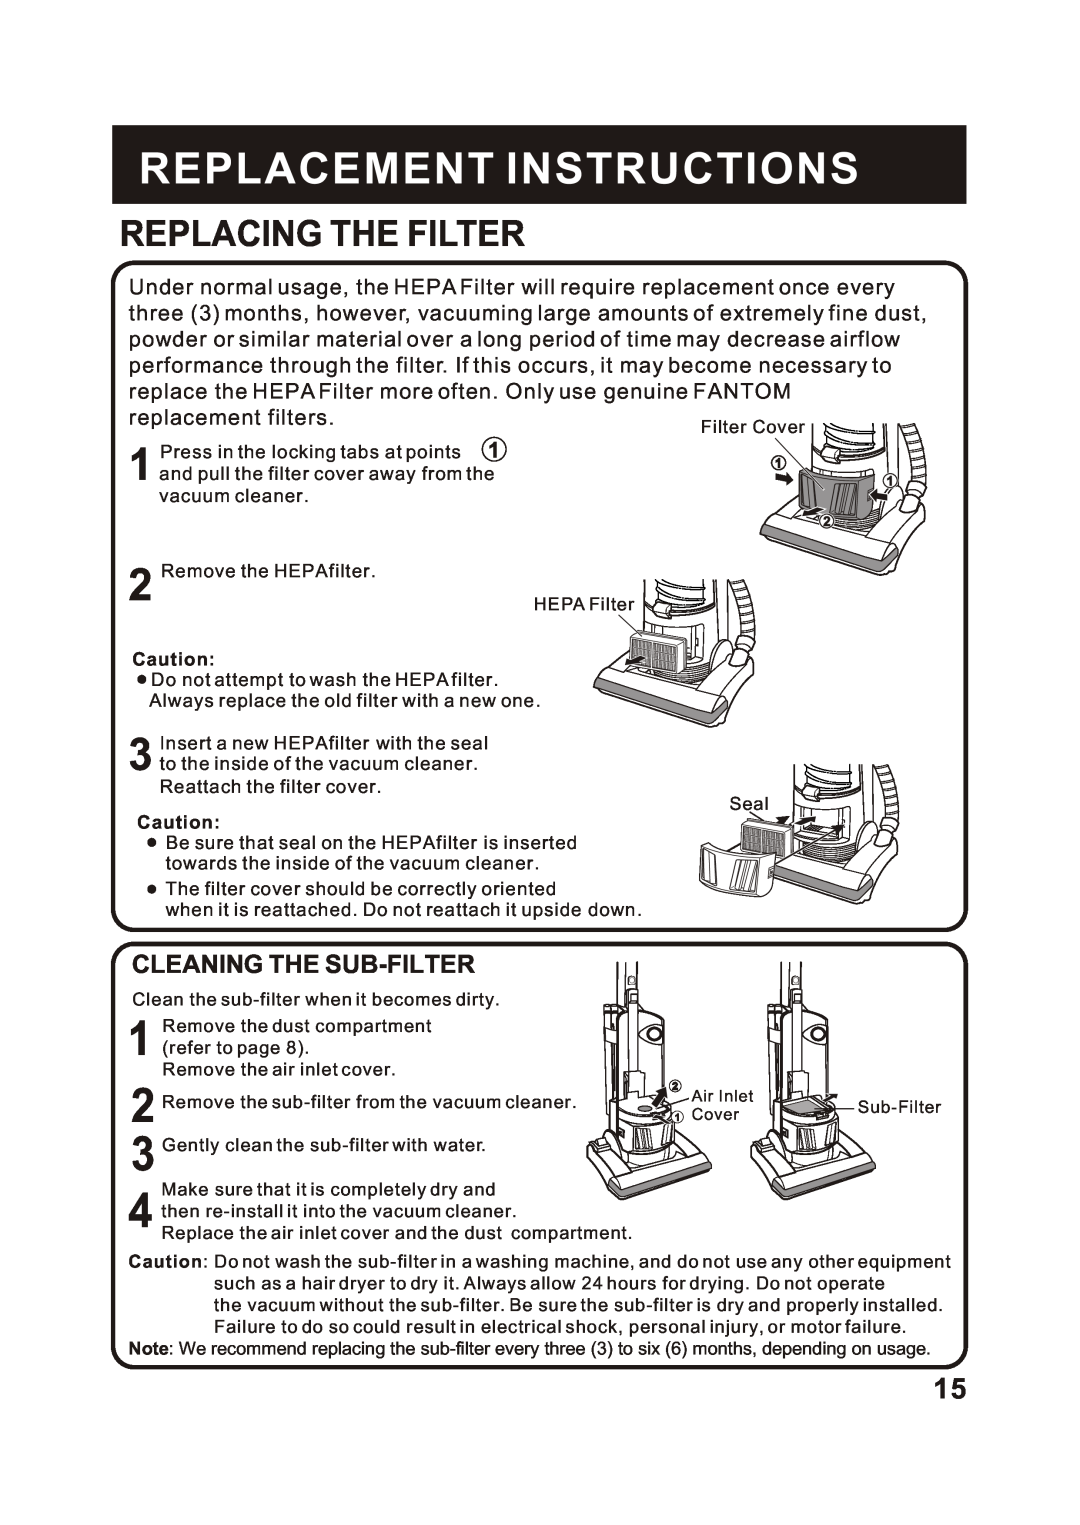 Fantom Vacuum FM742C instruction manual Replacing The Filter, Cleaning The Sub-Filter, Replacement Instructions 